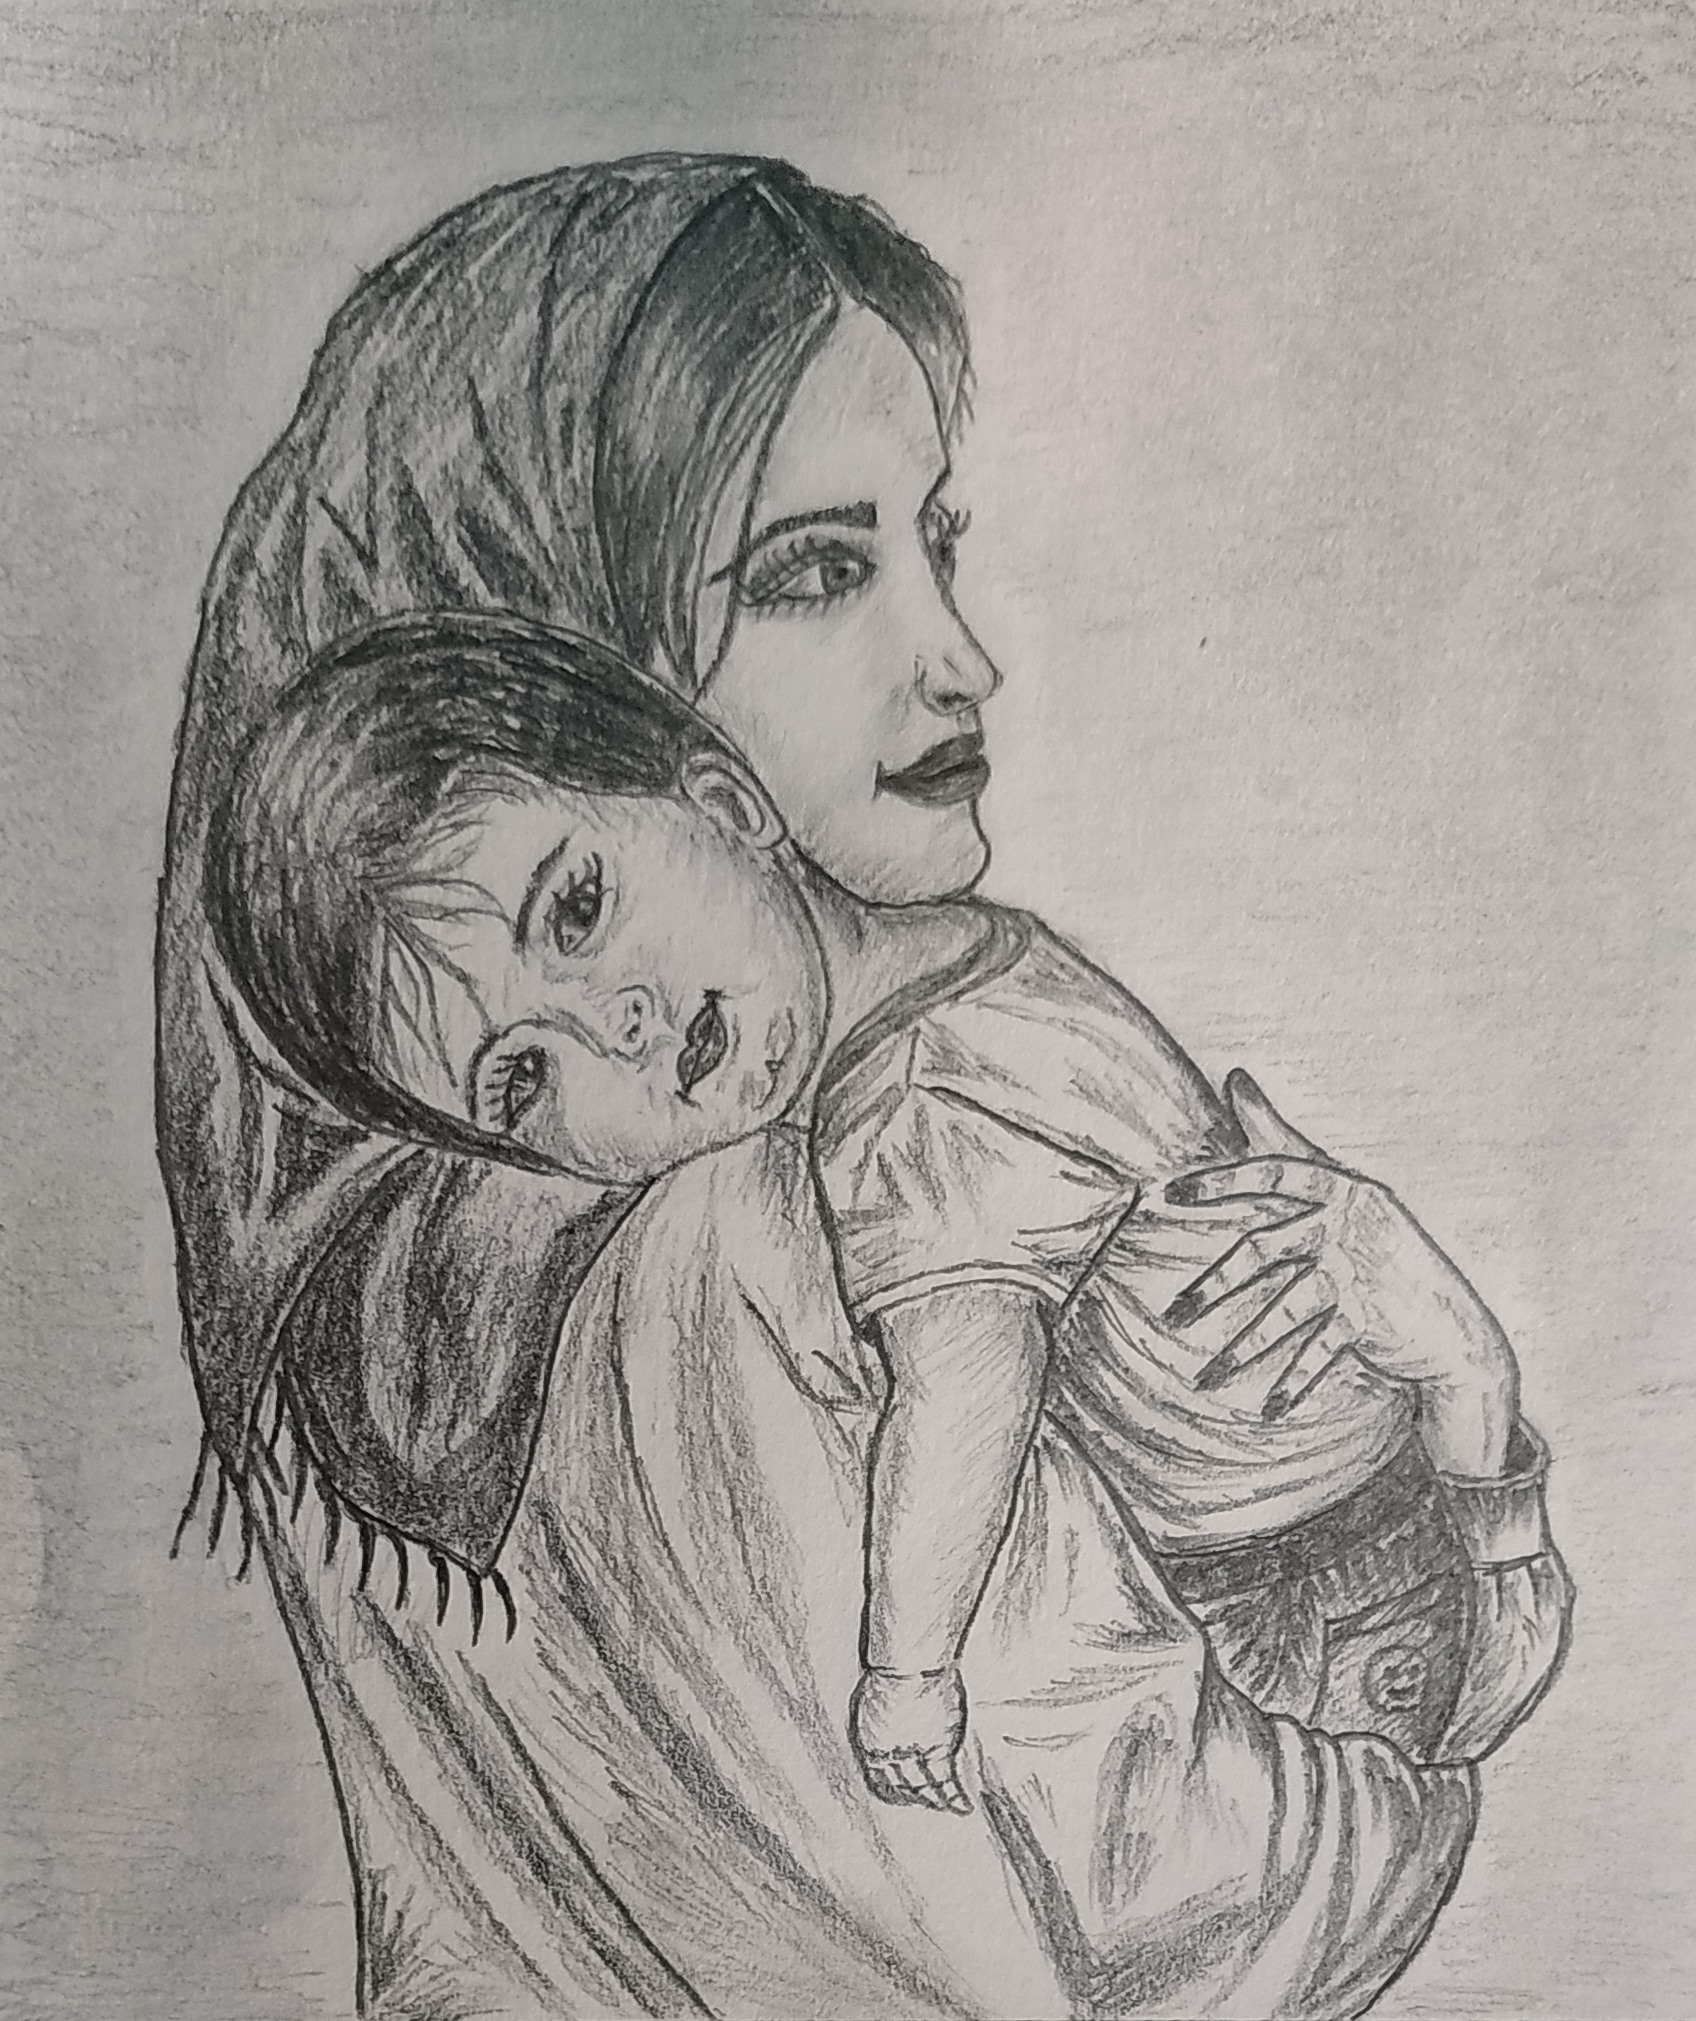 Mother And Child Drawing Pencil Sketch Colorful Realistic Art Images Drawing Skill While thinking about landscape art pencil sketching baby and mother may consider you baby and mother after posting this pencil sketch drawing, i browse more inspiration related to pencil sketch dining of baby and mother, we recommend you see all the pictures in our blog. drawing skill